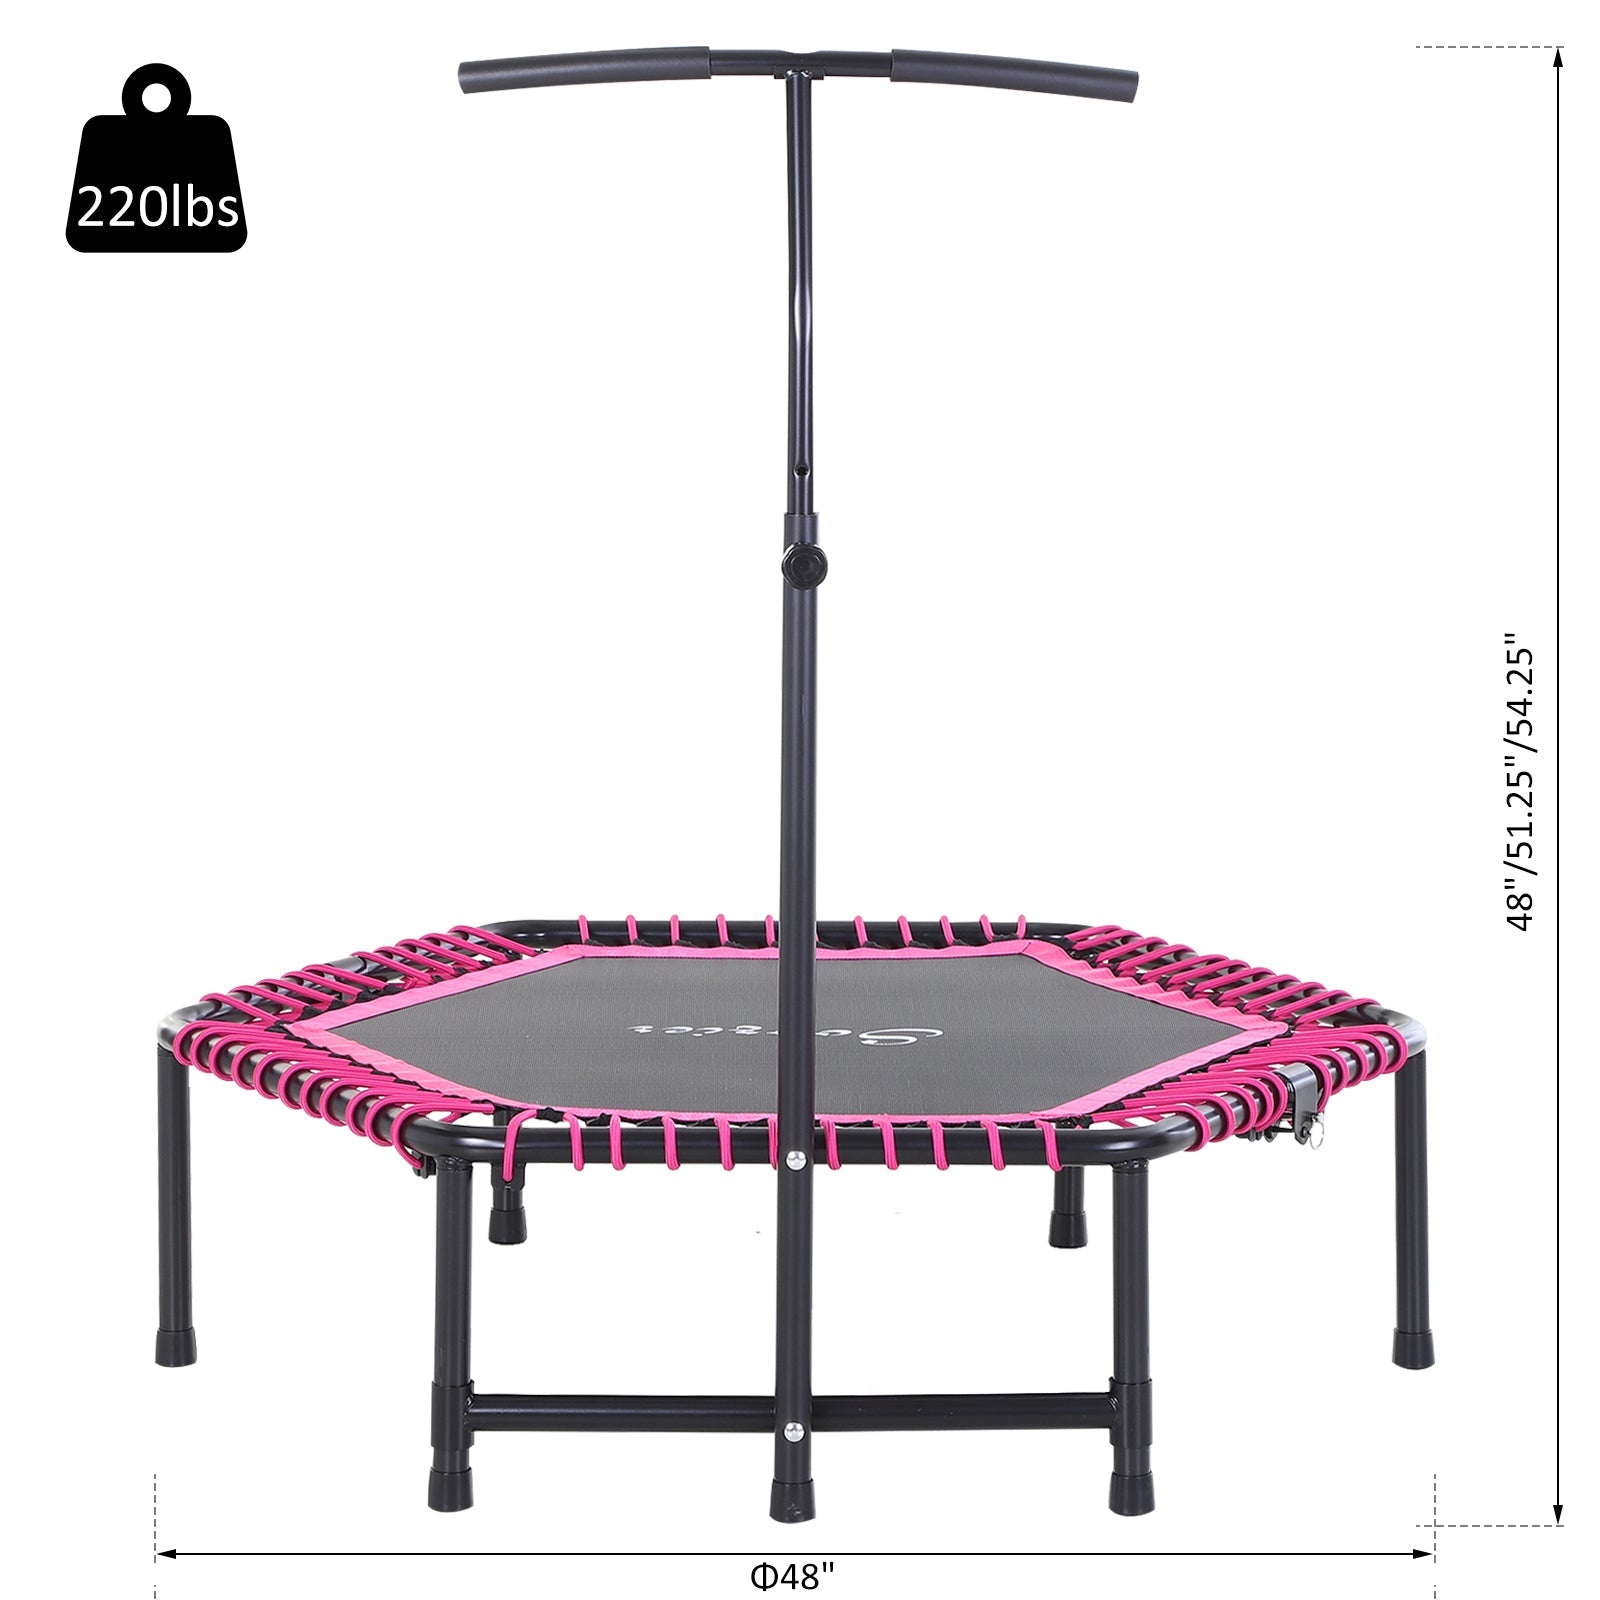 48" Adult Hexagon Rebounder Trampoline Fitness Bungee Jumping Cardio Trainer Outdoor Bouncer Jumper Adjustable Bar Pink at Gallery Canada